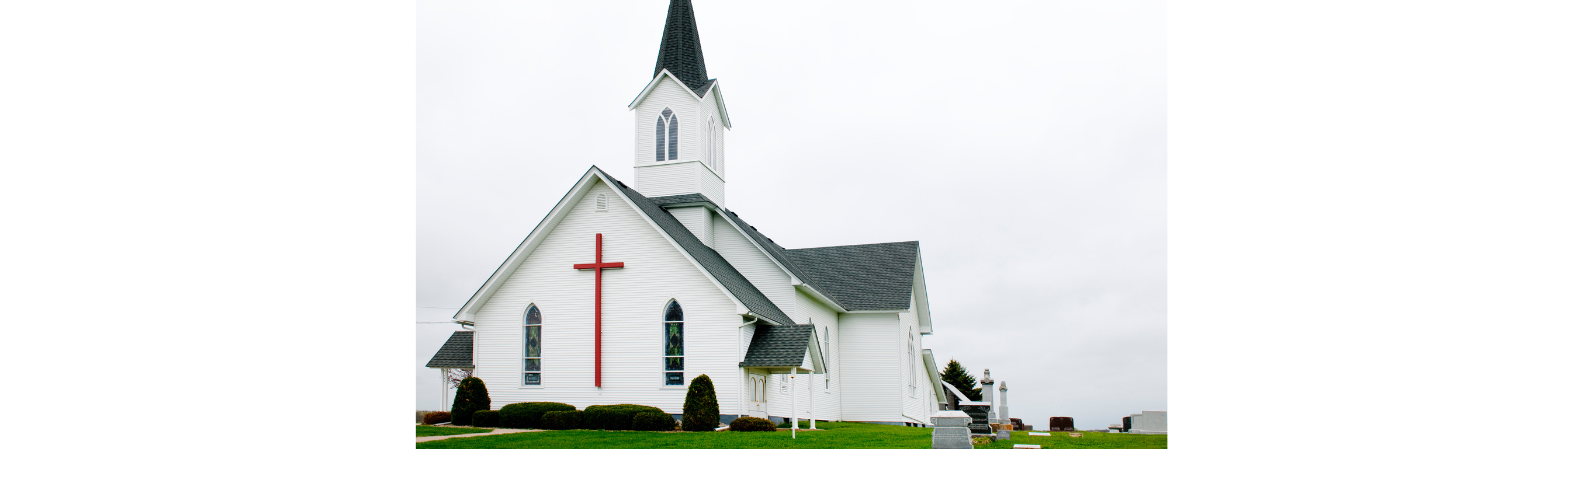 3 Things The Modern Church and the Devil Have in Common